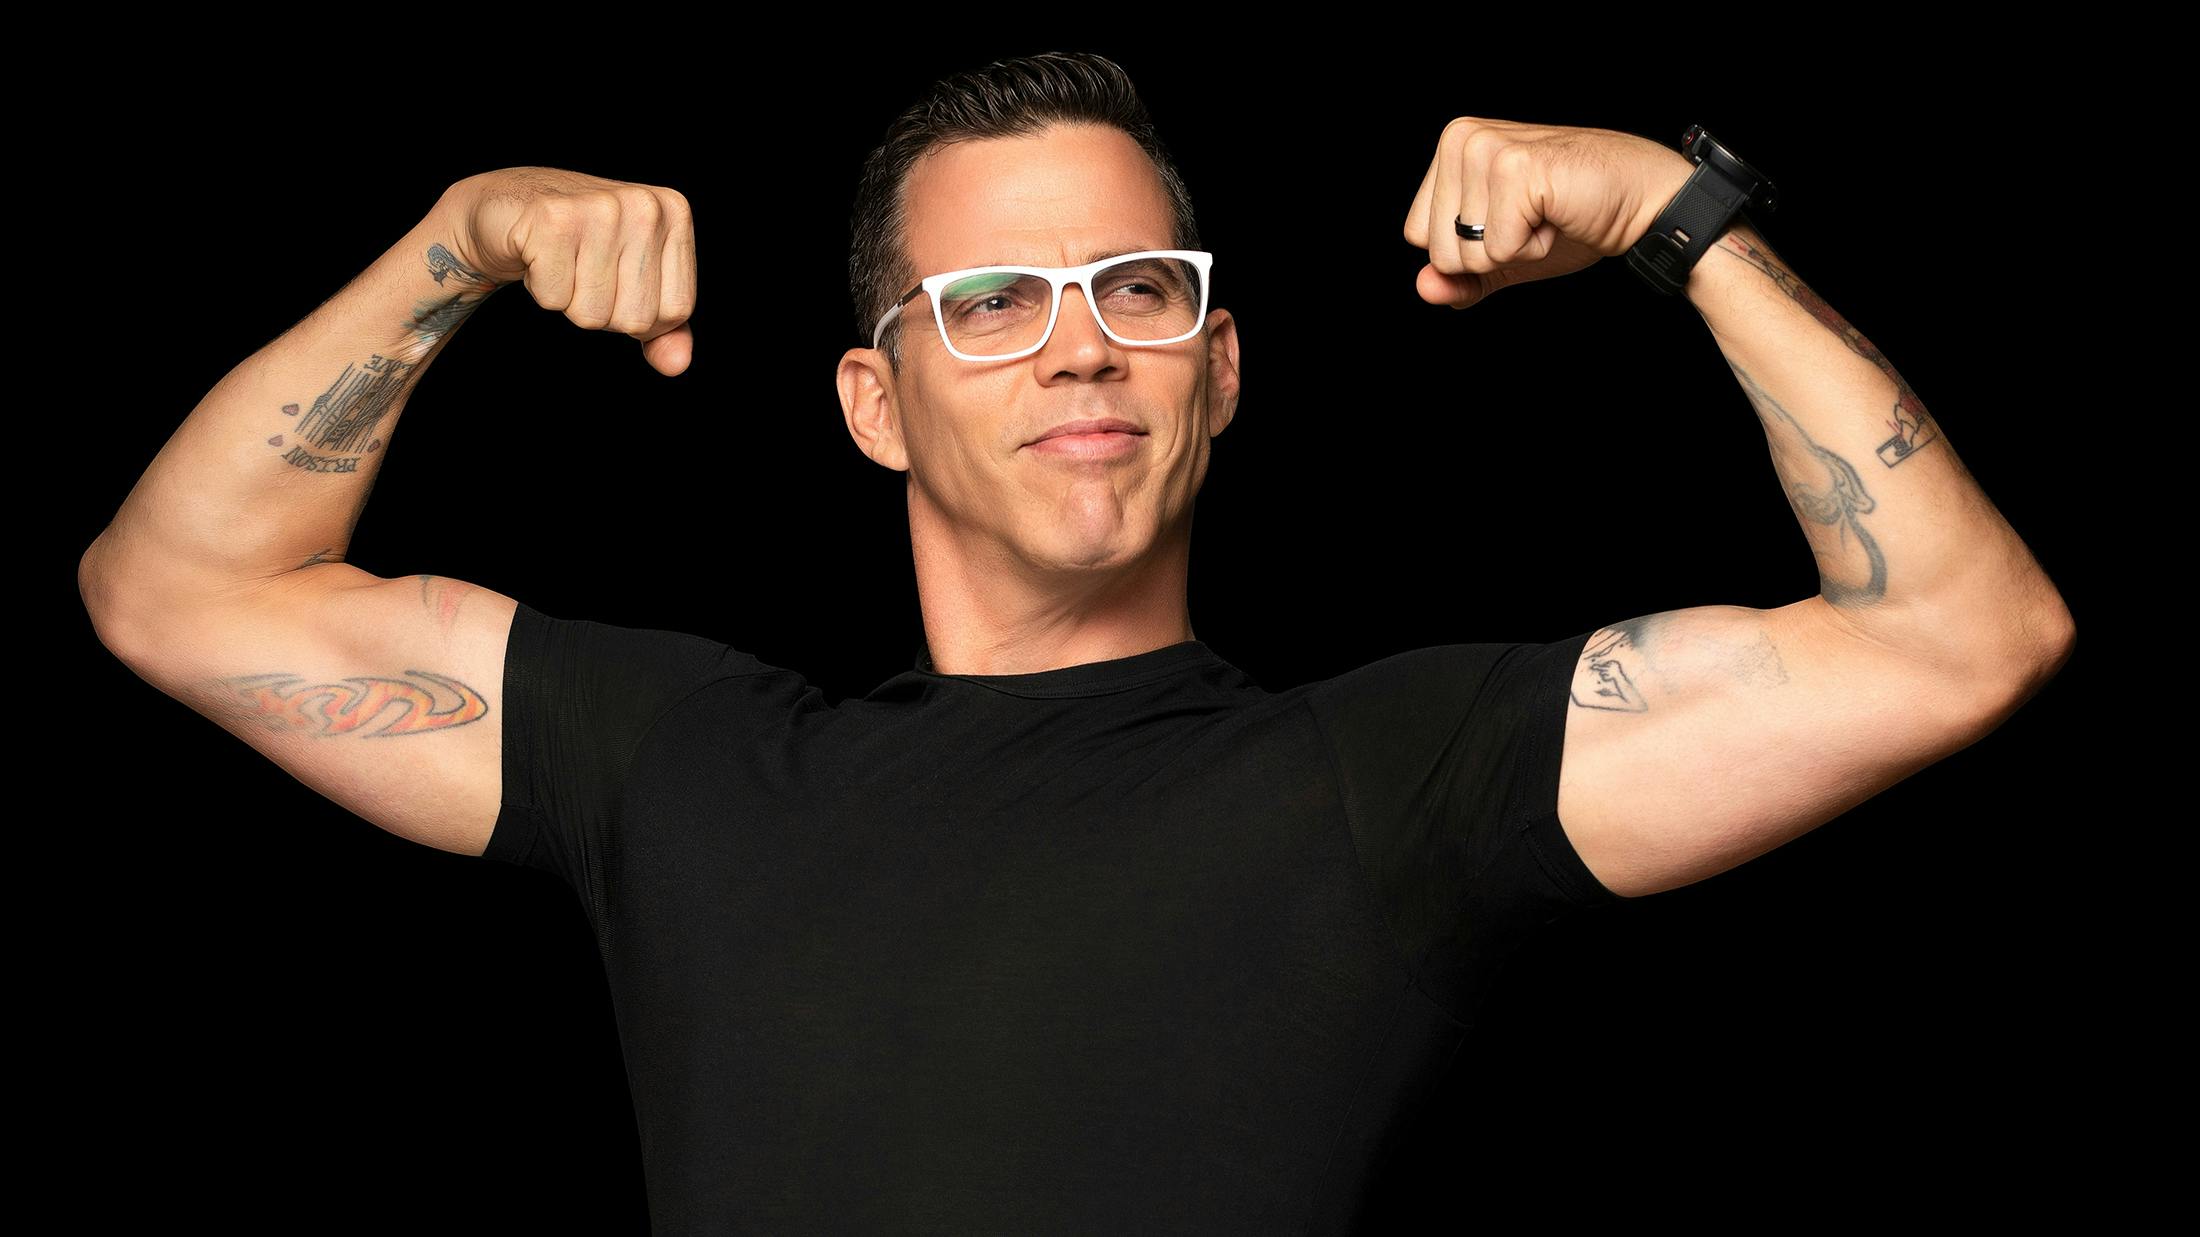 Steve-O: The 10 songs that changed my life